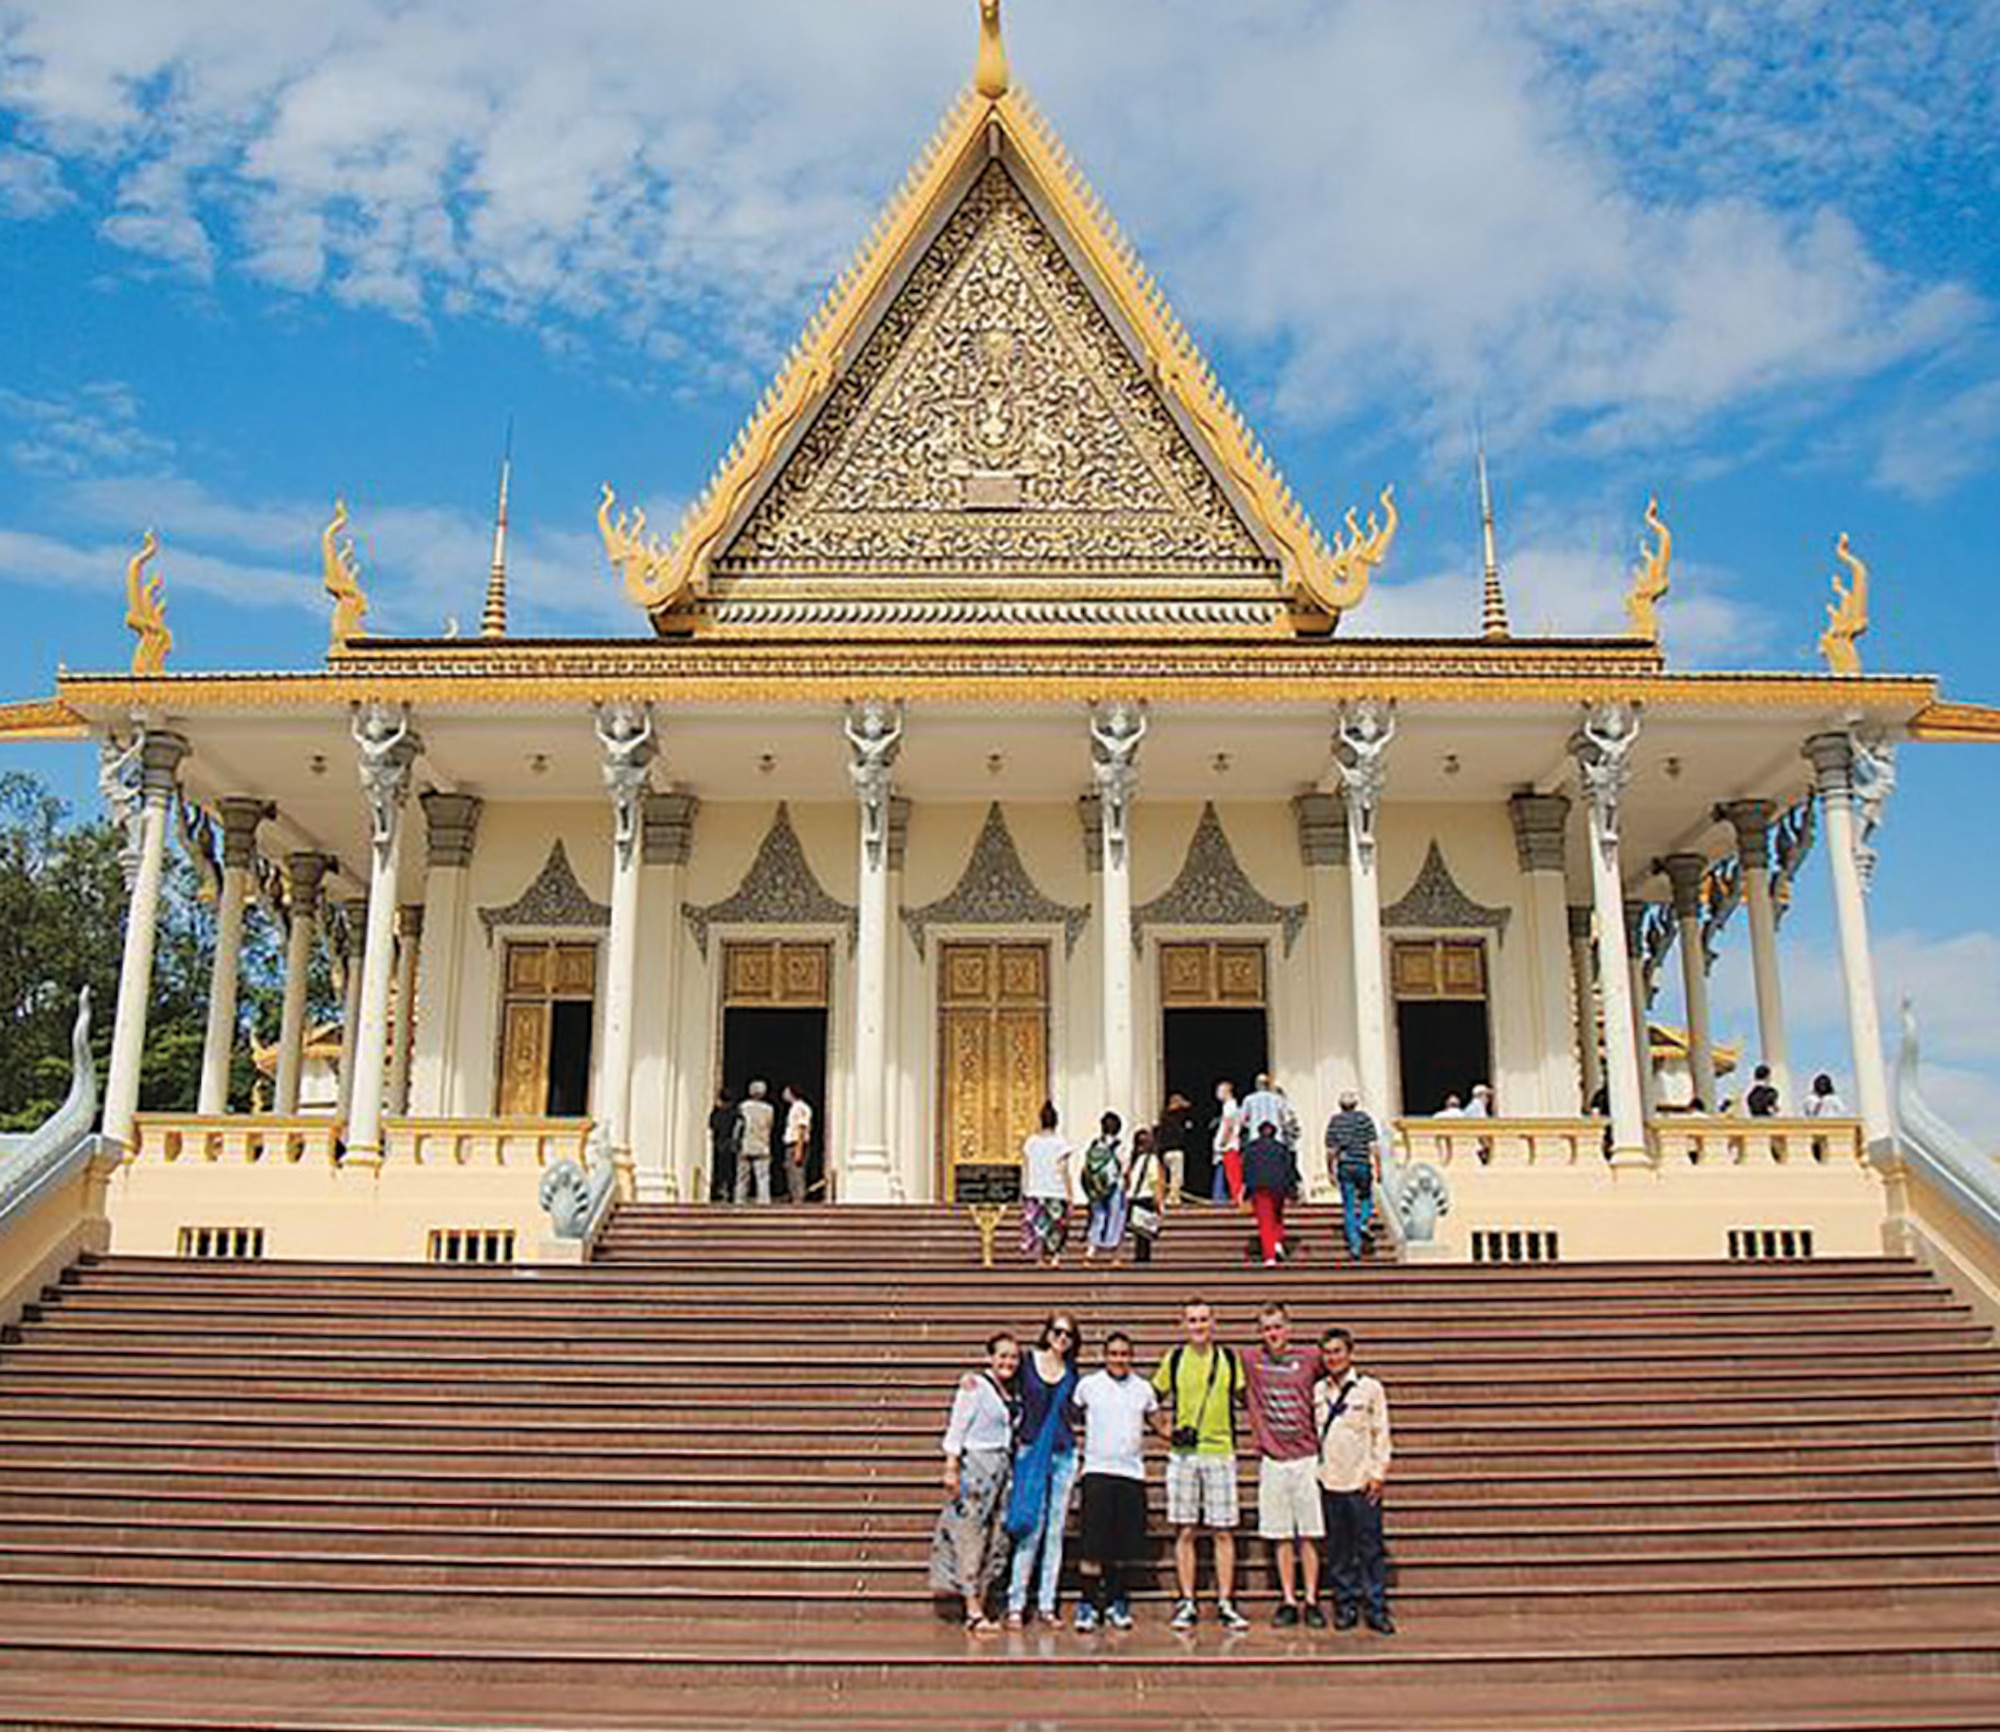 Academy cadets pose near the Royal Palace in Phom Penh, Cambodia, this summer. The team, led by Col. Marty France, Astronautics Department head, traveled to Cambodia through the Academy's cultural immersion program. (Courtesy photo)